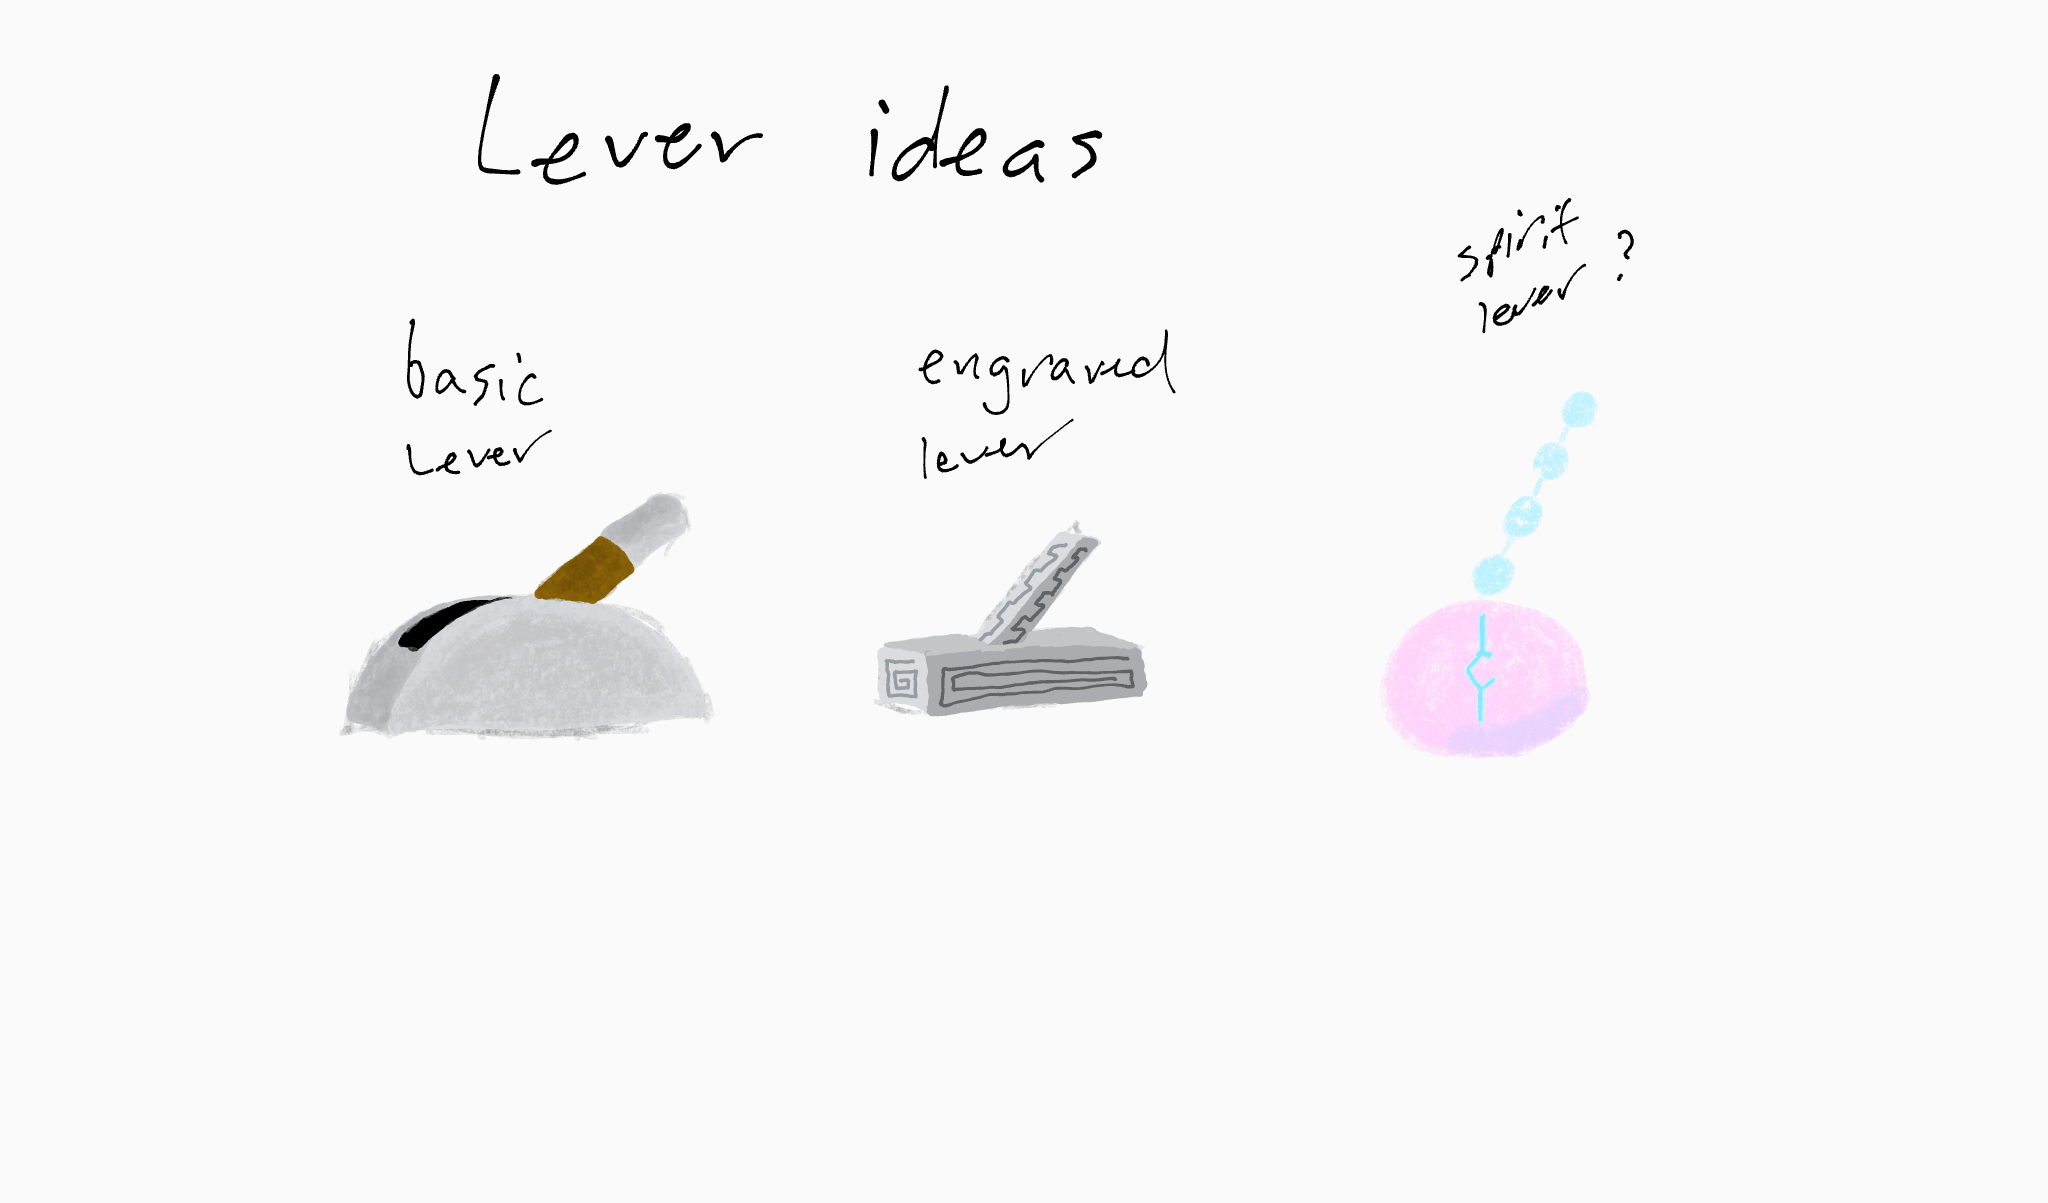 Early lever ideas